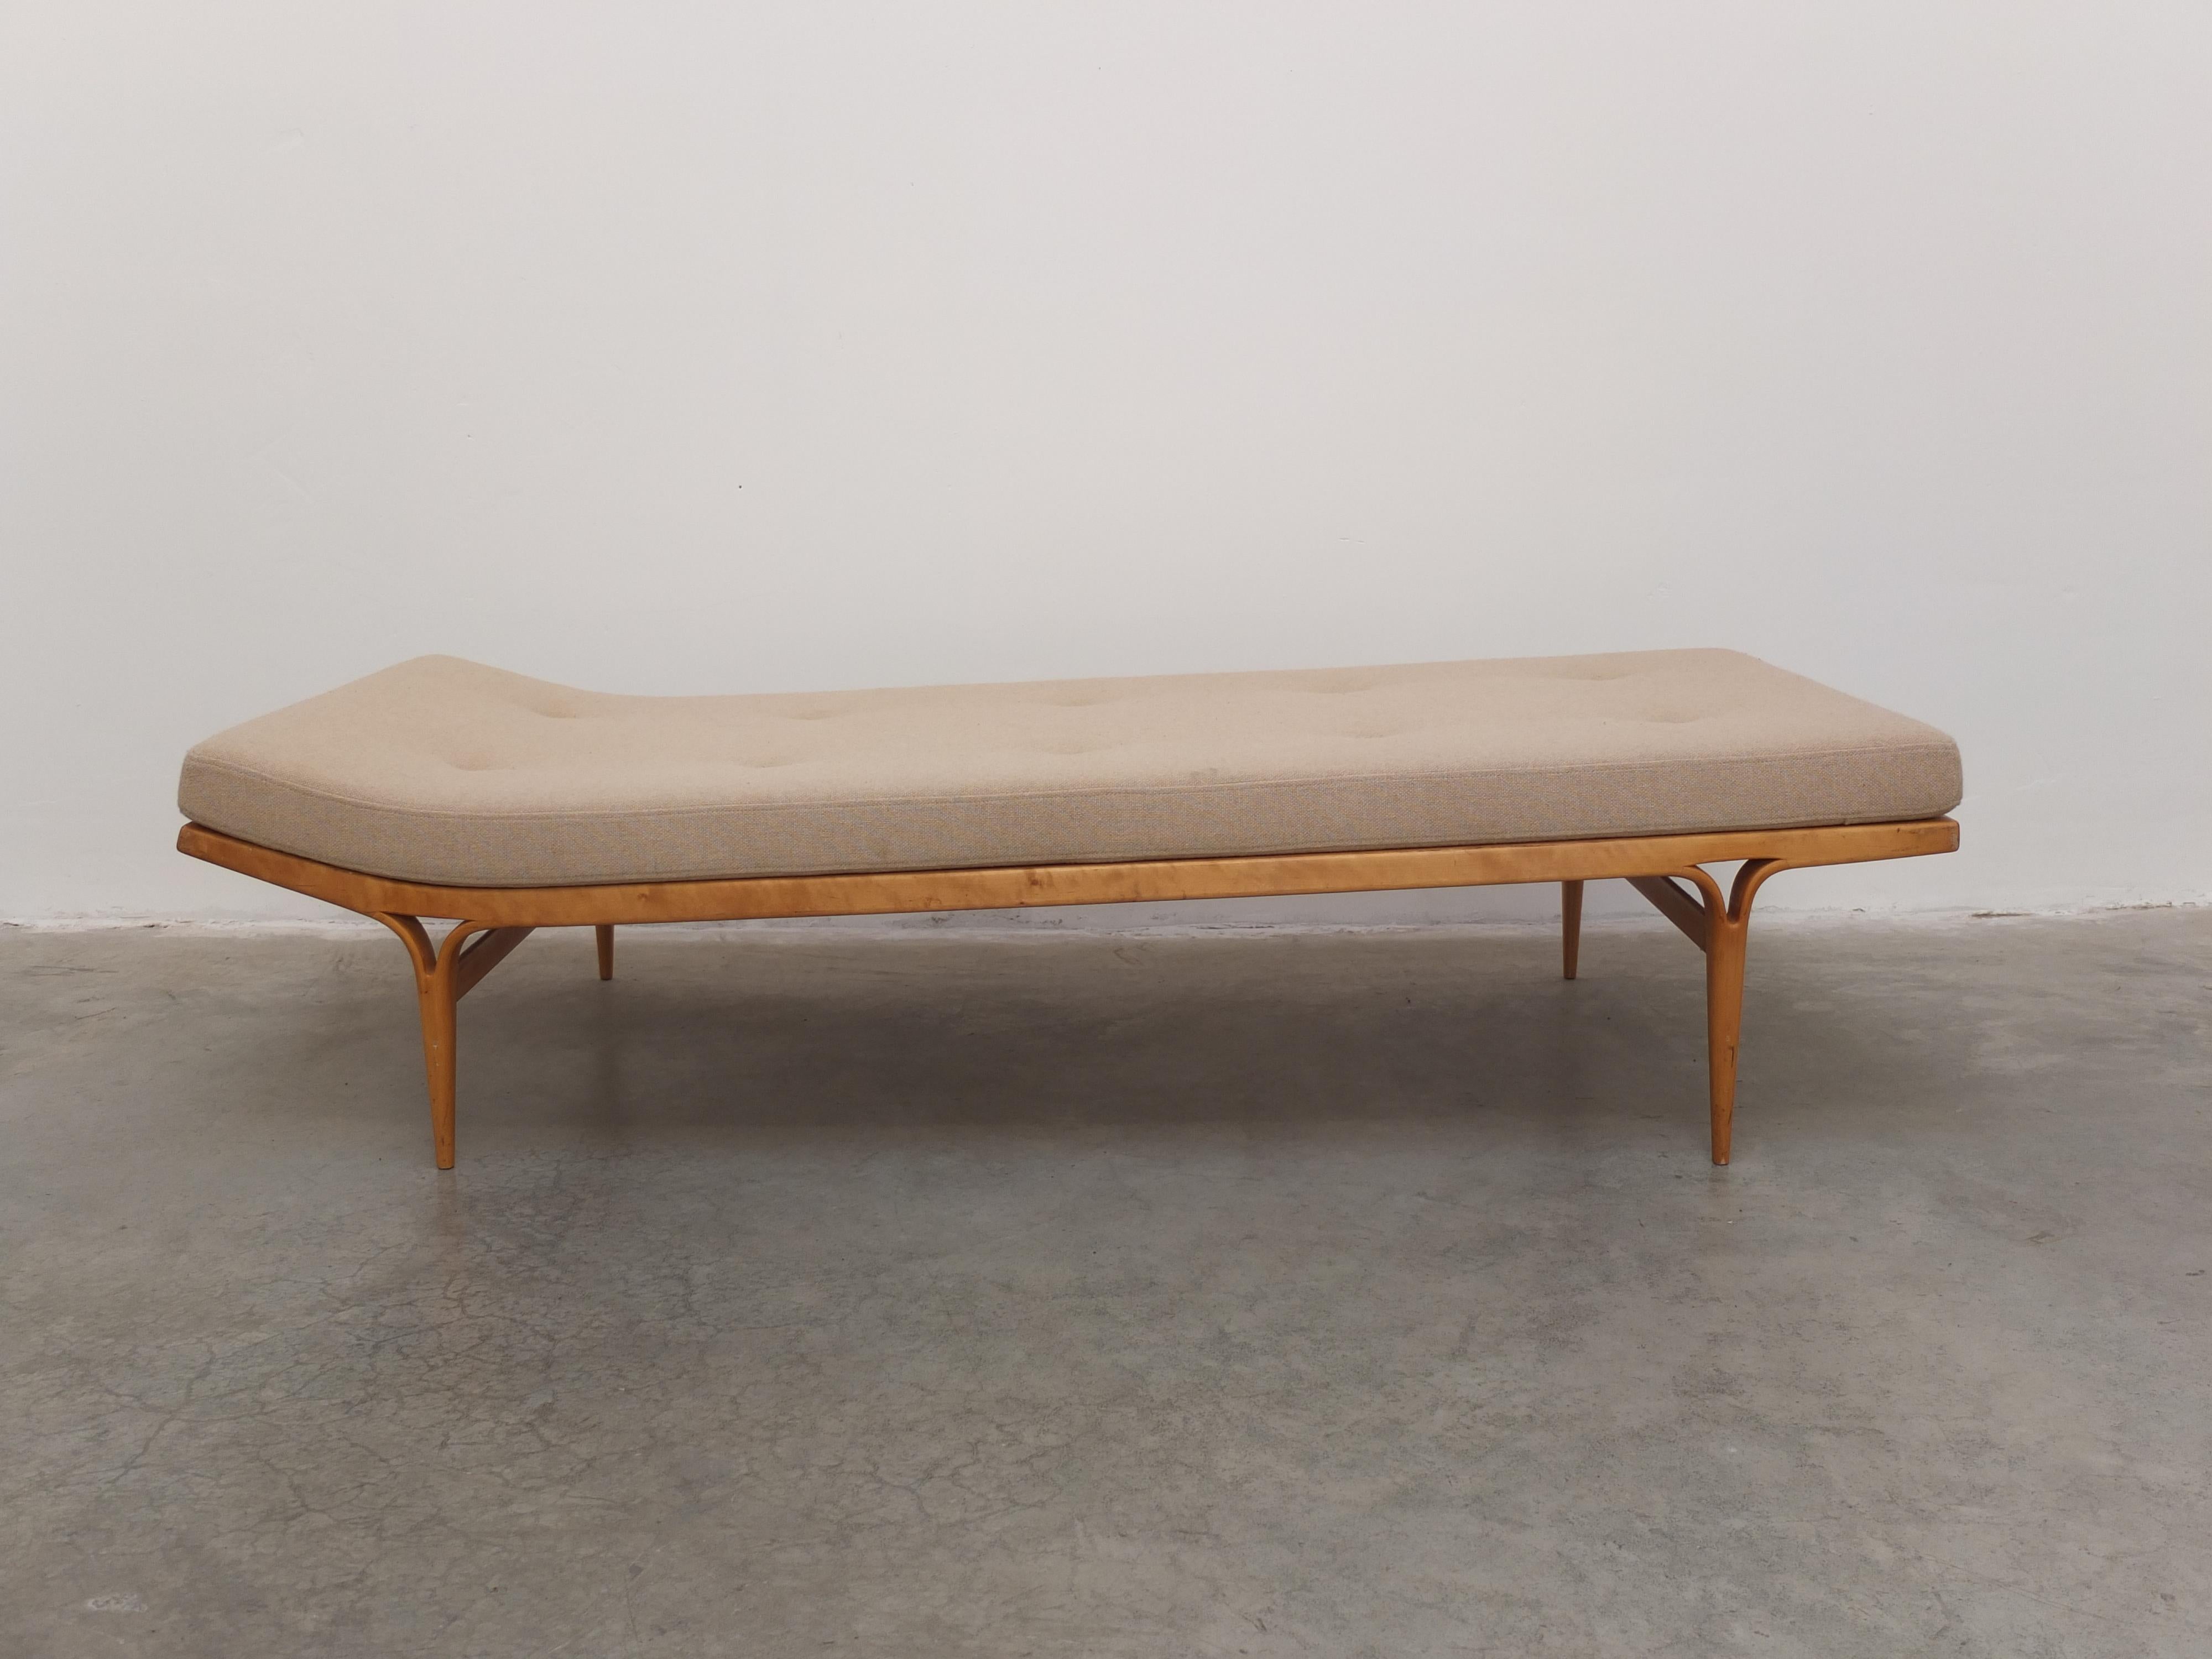 A rare and beautiful ‘Berlin’ daybed designed by Bruno Mathsson for Karl Mathsson in 1957. It was first shown in 1957 at the International Building Exhibition in Berlin where it received its name. The elegant frame is made of beech wood and the thin